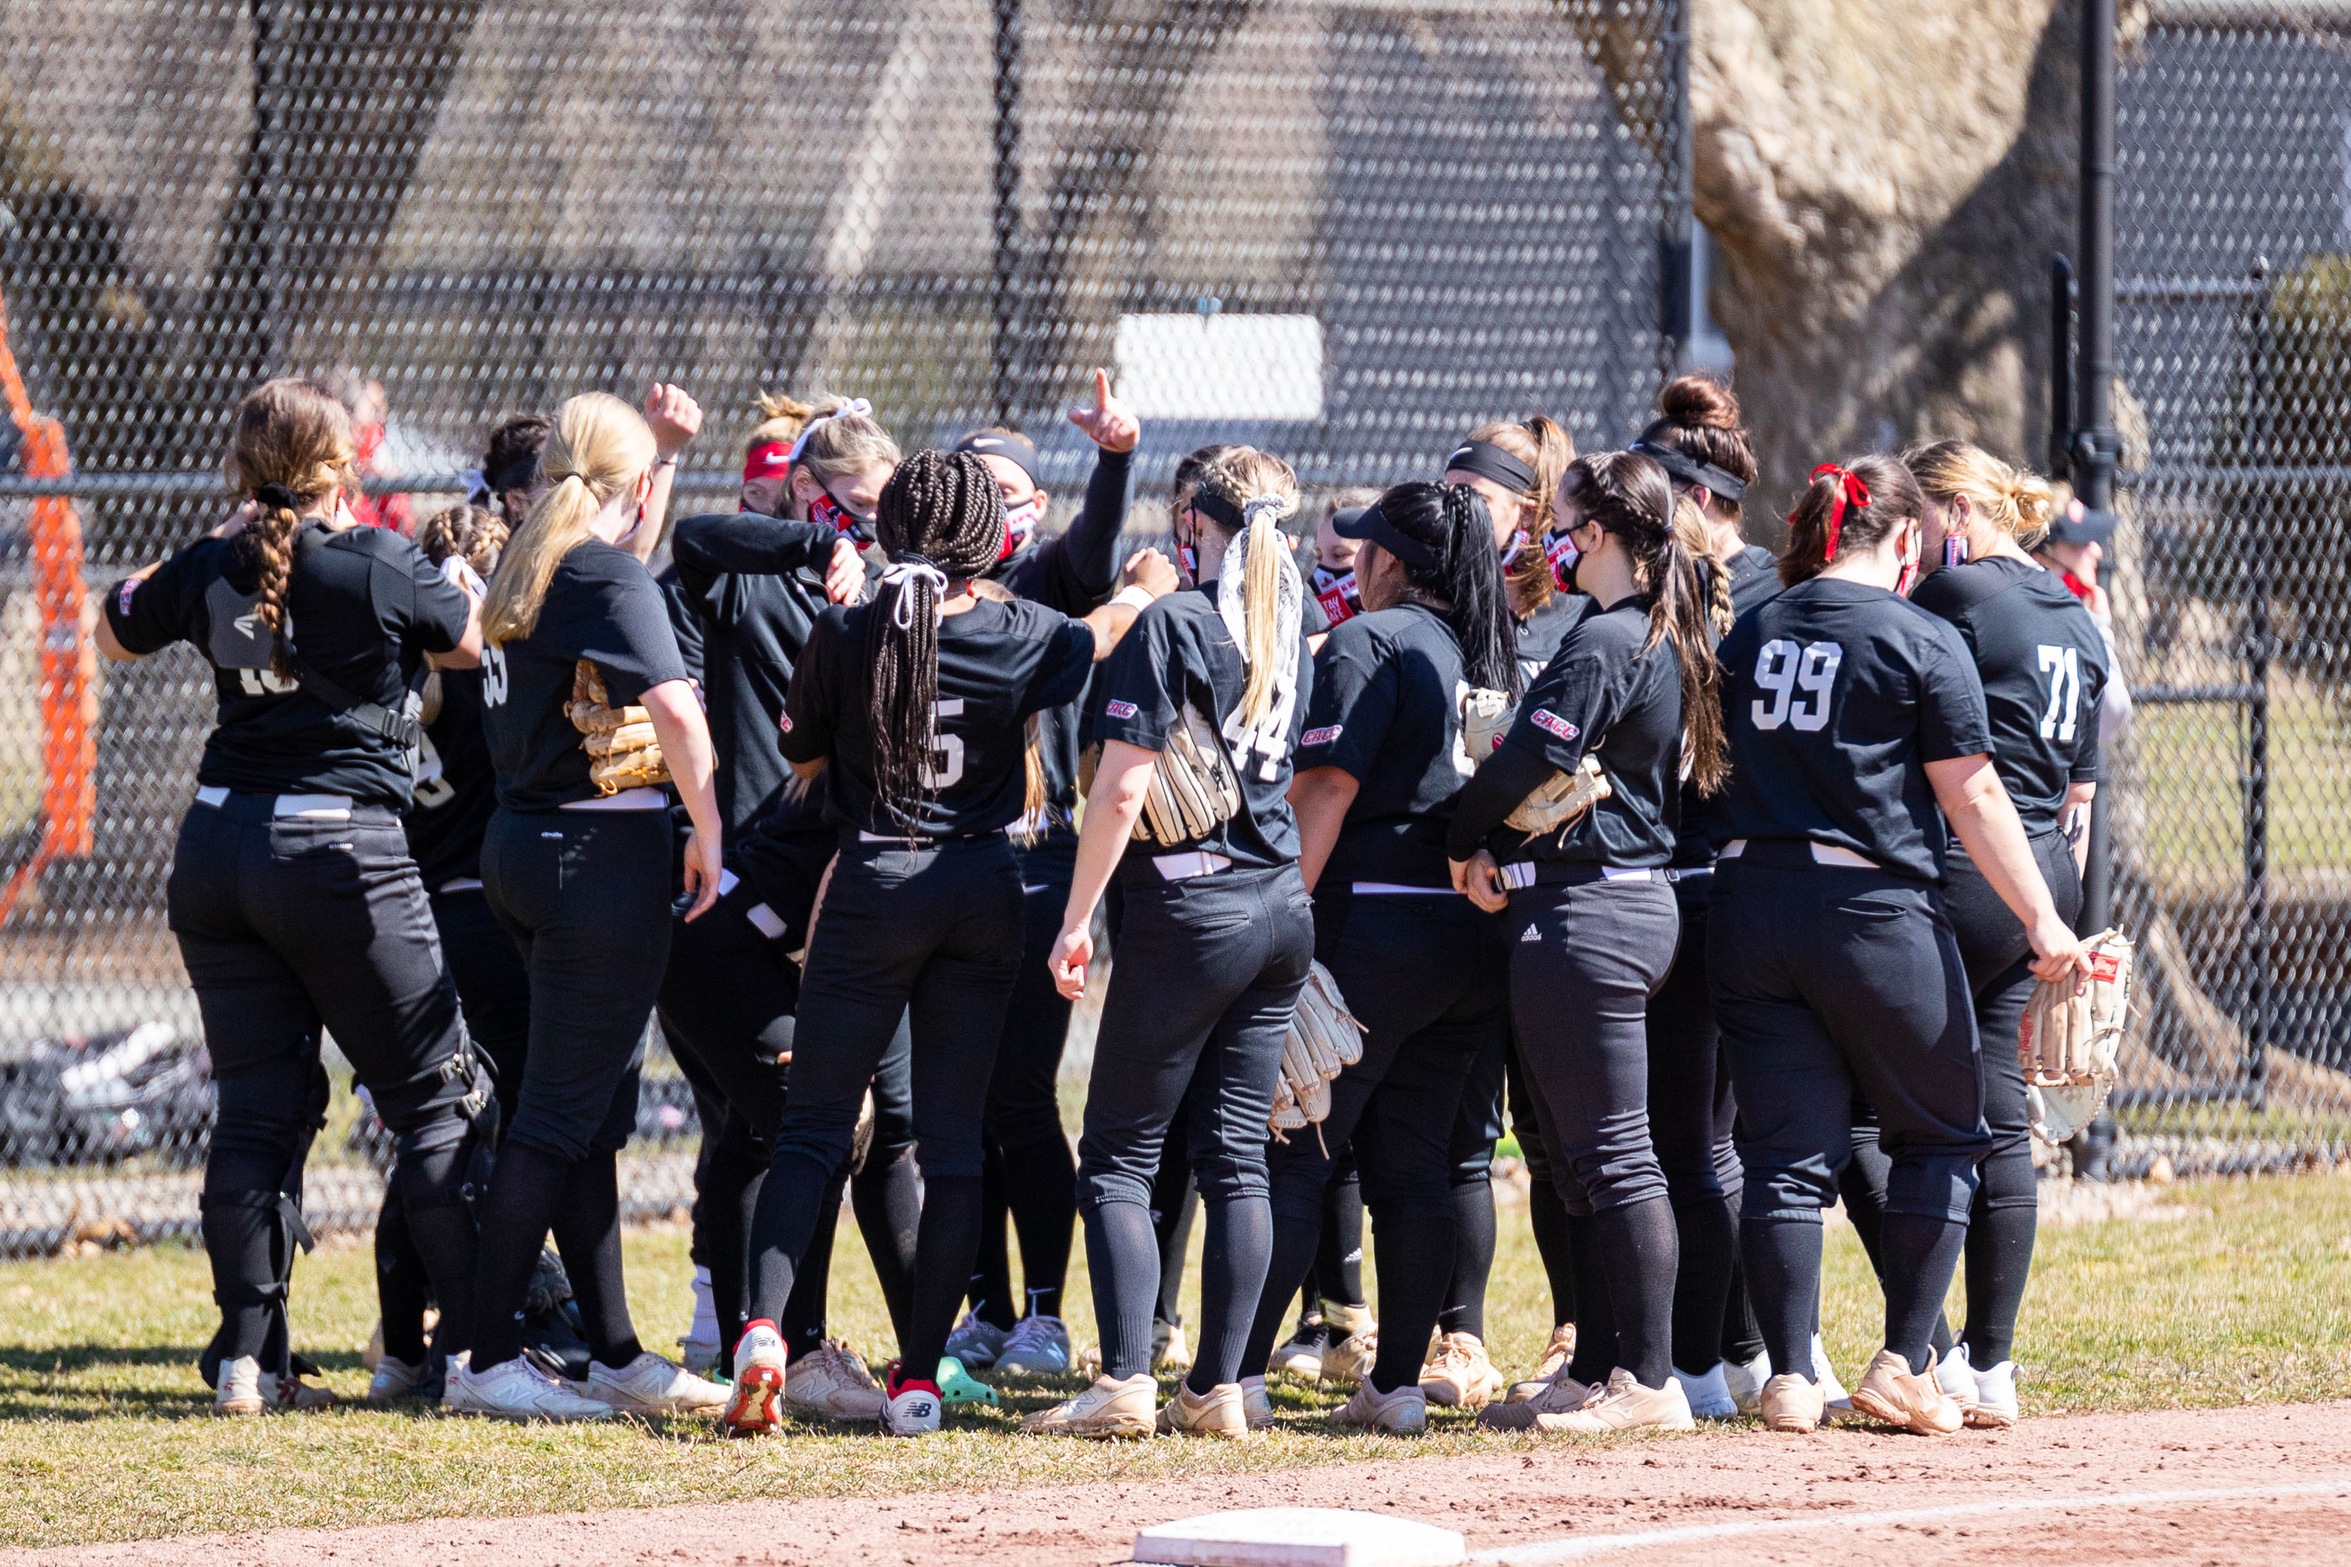 SOFTBALL TIES FOR SECOND PLACE IN CACC PRESEASON POLL